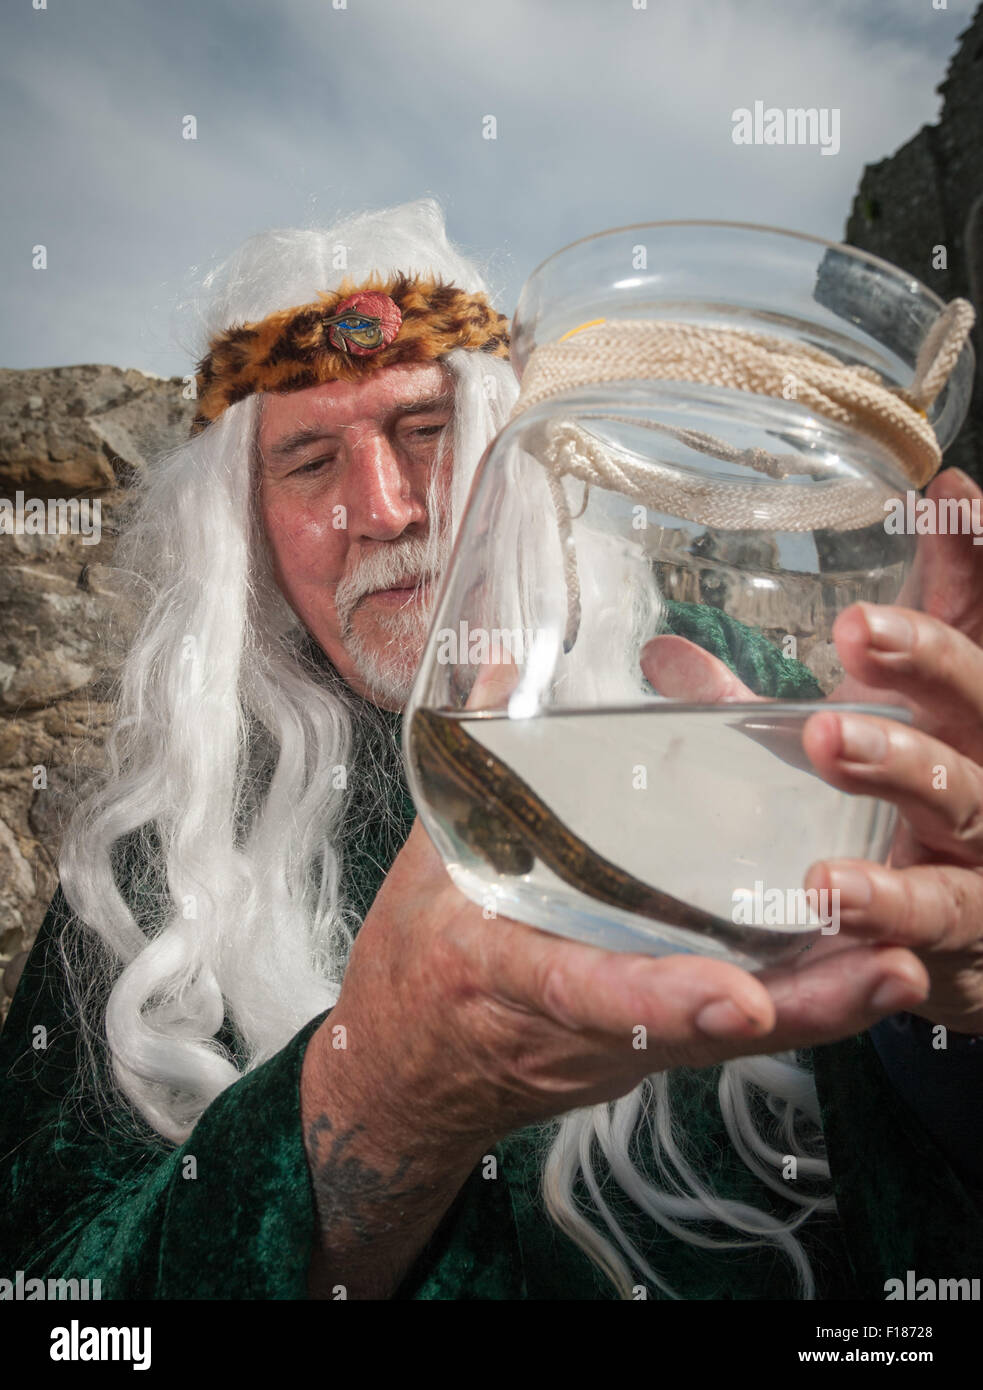 South Wales, UK, Saturday 29 August 2015. The 3rd annual Medieval Fair at Kidwelly Castle, near Llanelli, Carmarthenshire, Wales, UK. Pictured is Bob Edwards, 'Apothecary', with one of the tools of his trade, a leach, at Kidwelly Castle during bank holiday weekend. Credit:  Algis Motuza/Alamy Live News Stock Photo